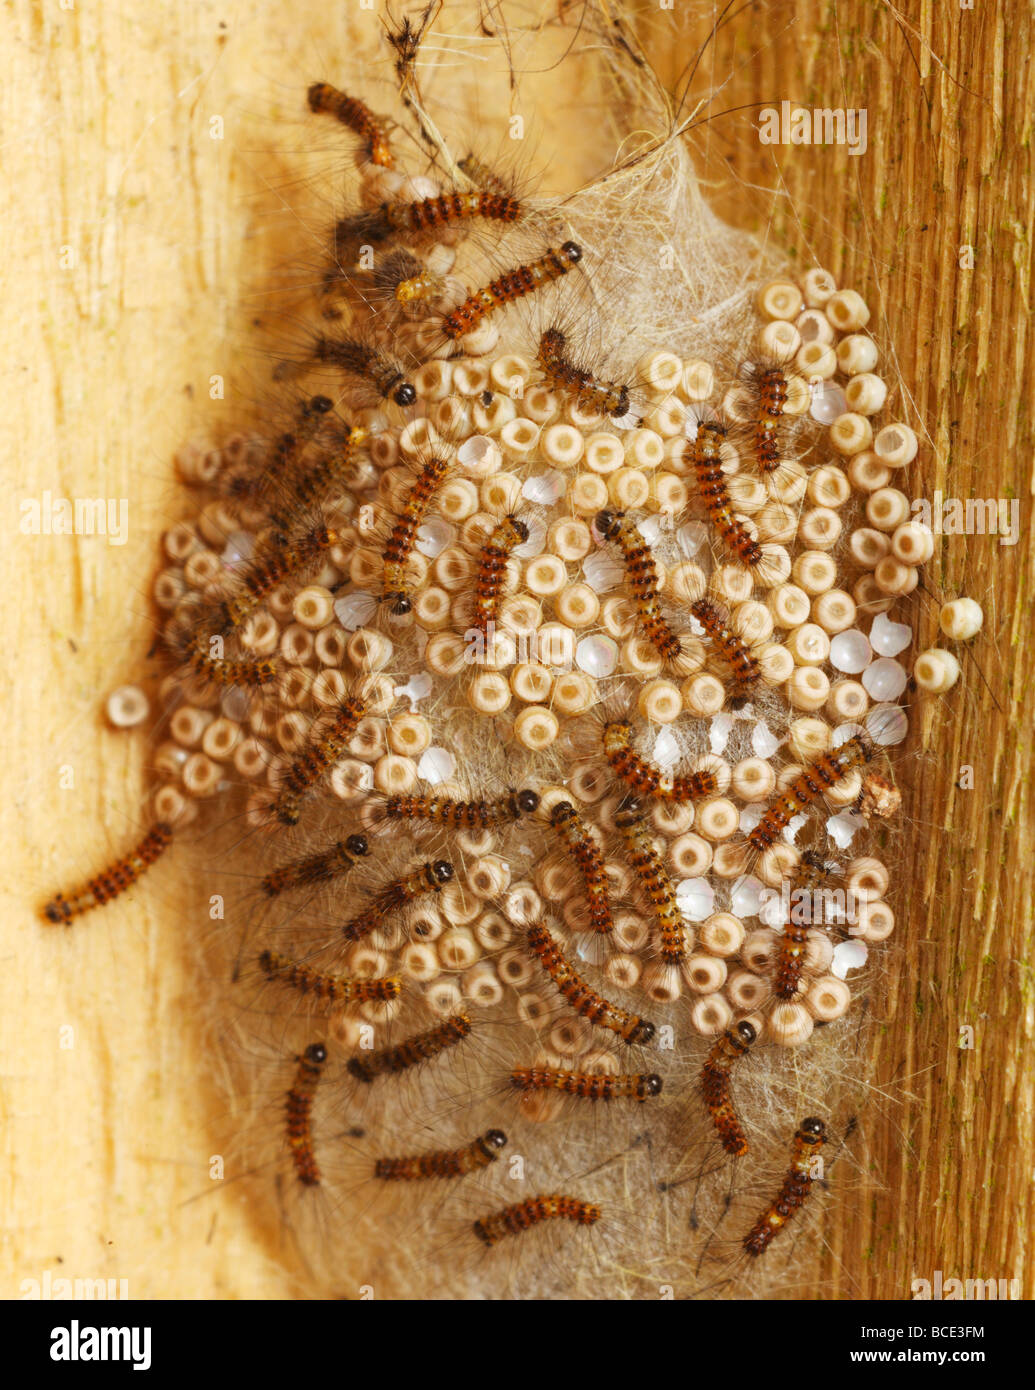 Caterpillars emerging from their eggs Stock Photo